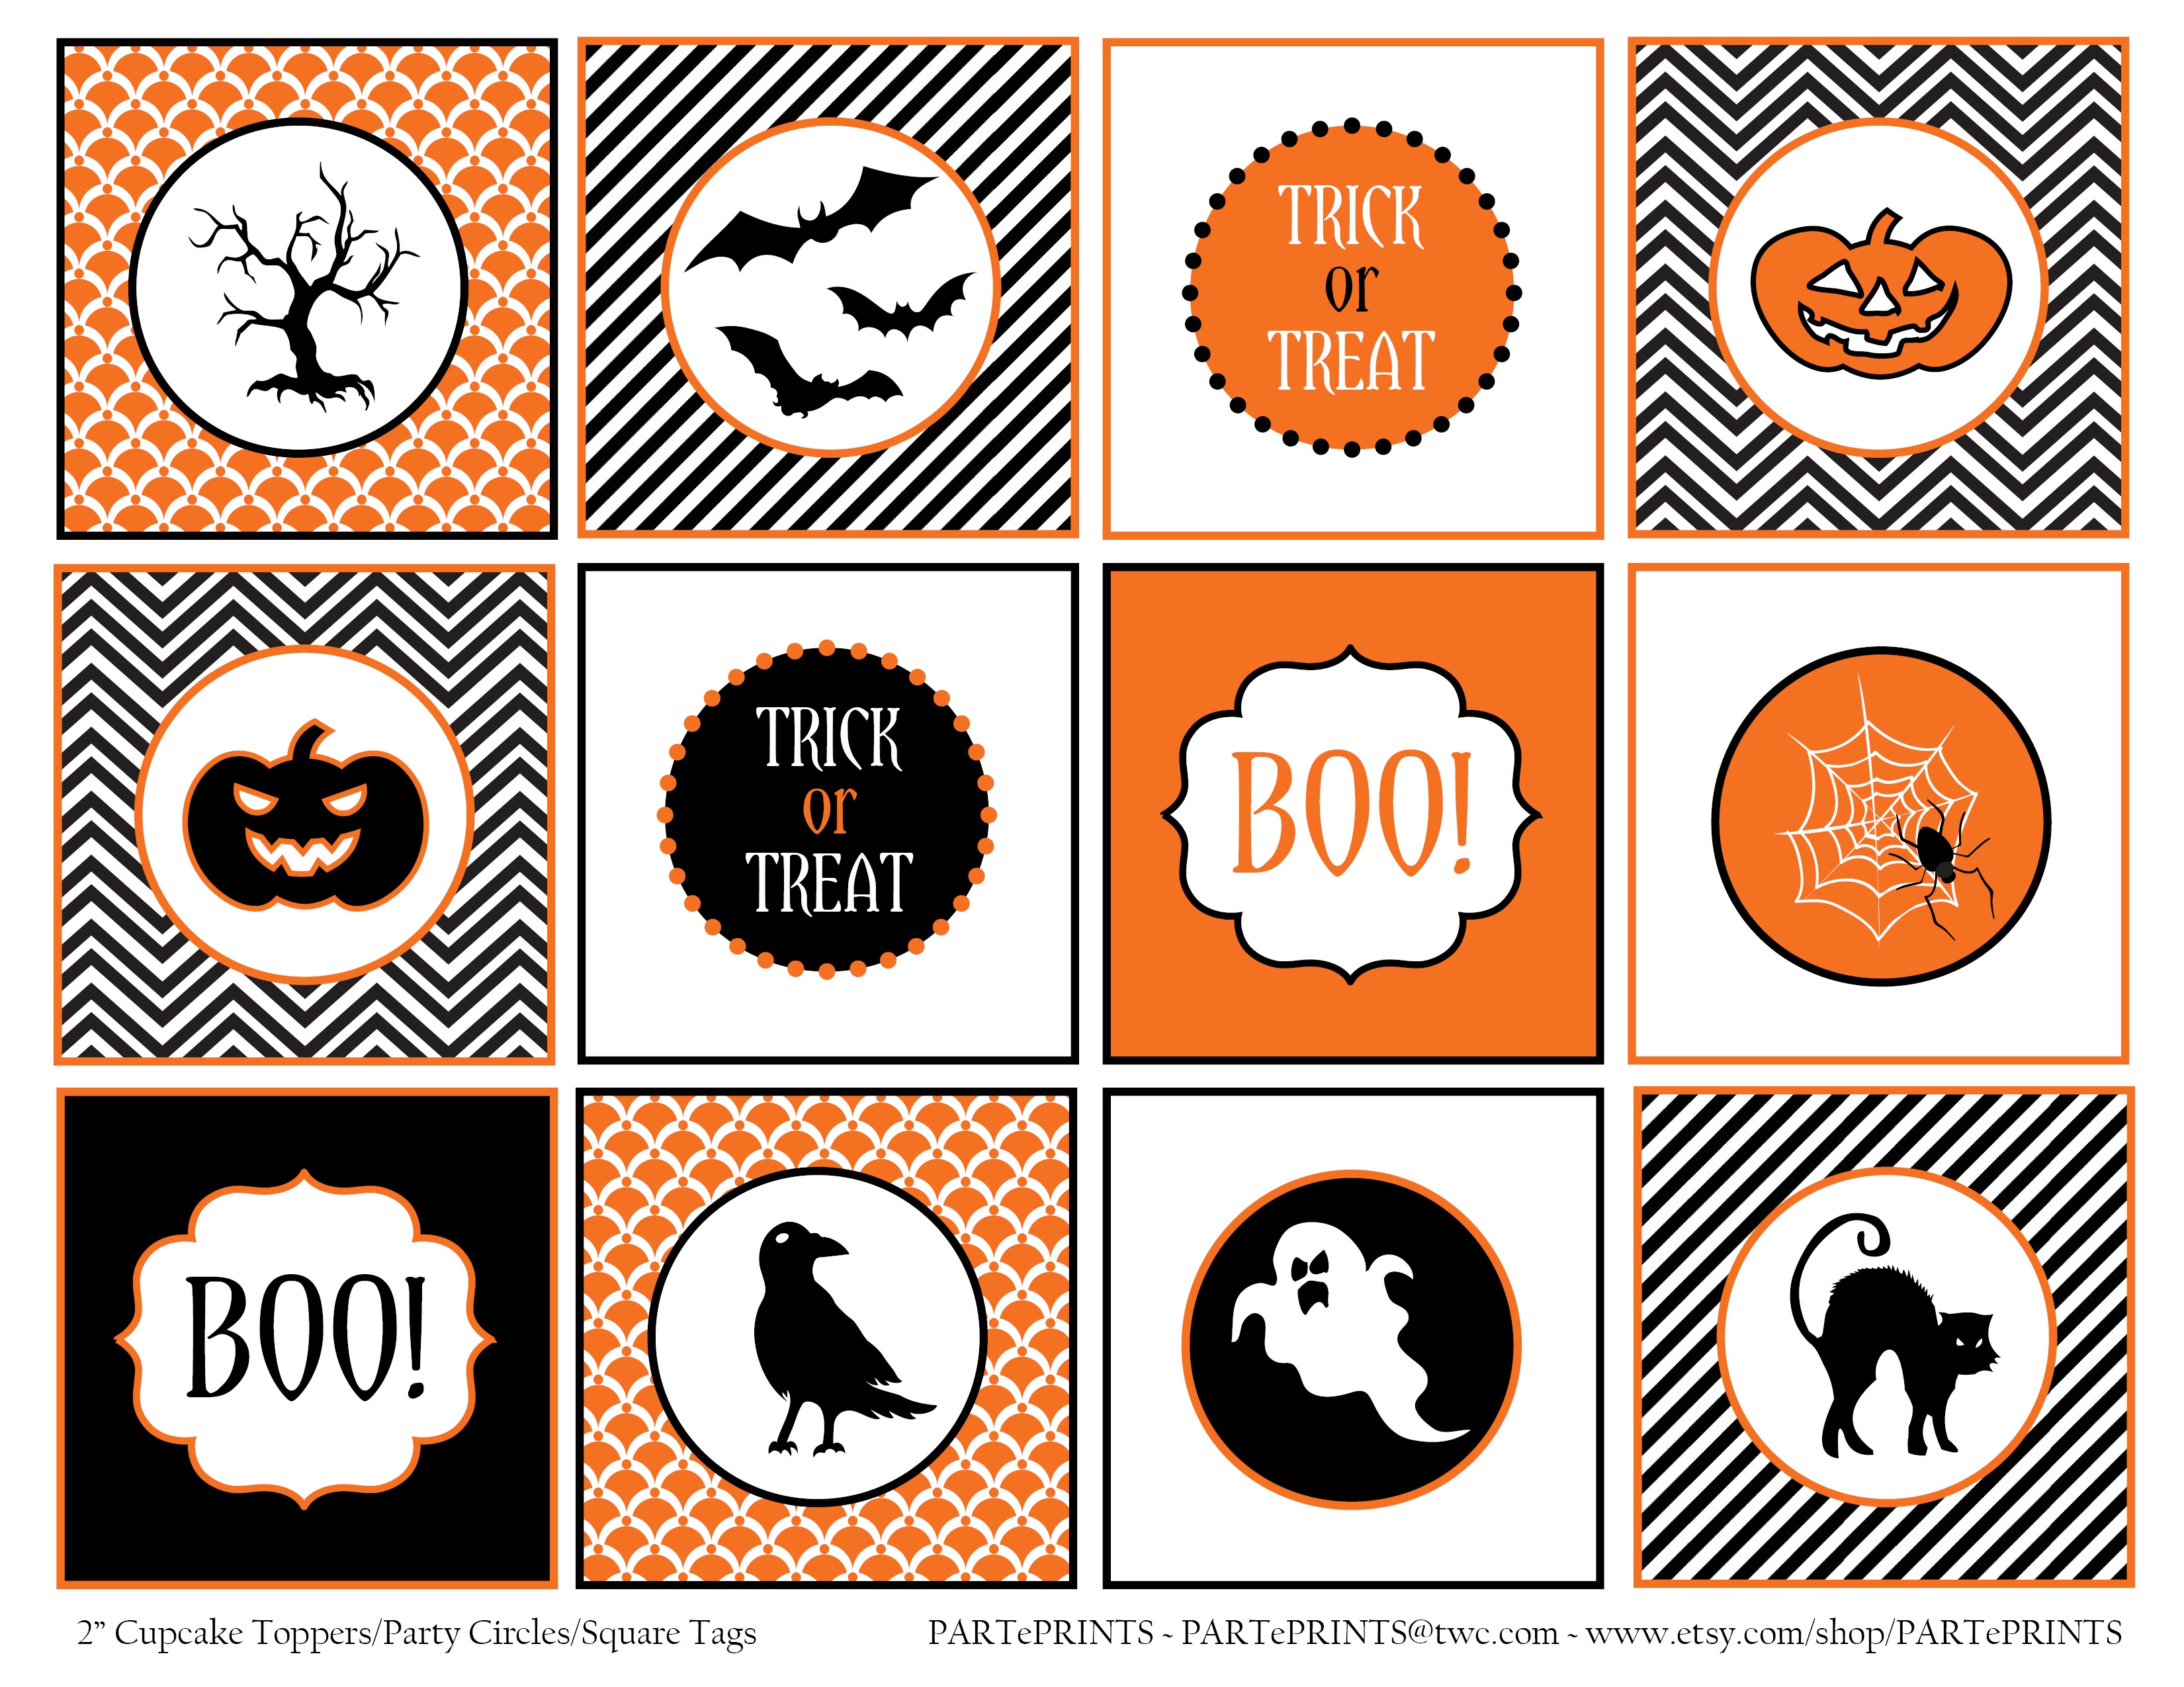 Free Halloween Printables From Parteprints | Catch My Party - Free Printable Halloween Labels